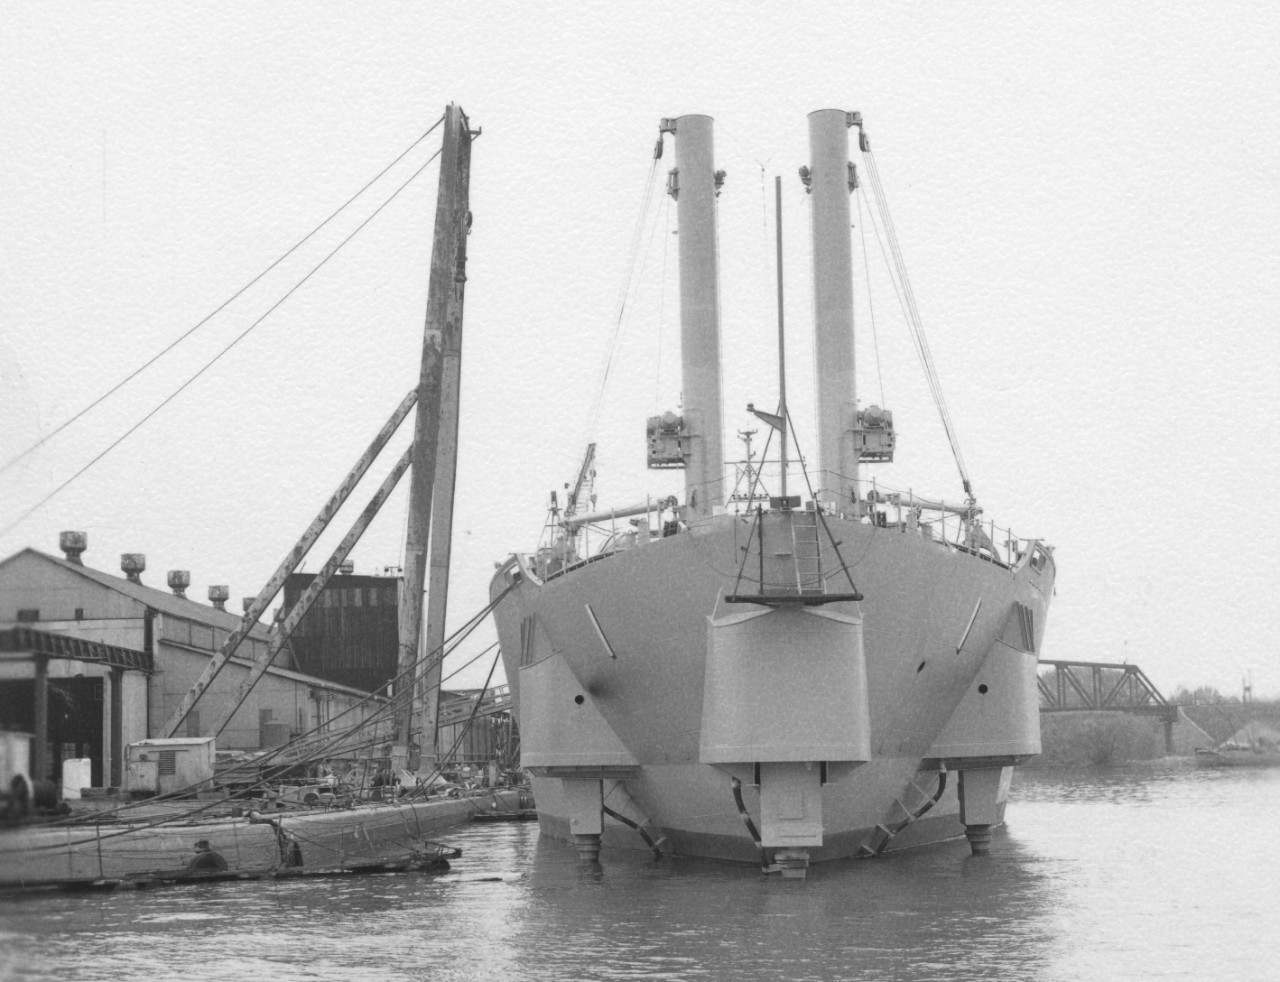 View from directly astern showing MSS-1’s three after inboard-outboard diesel engines, Lorain, Ohio, 28 April 1969. (U.S. Navy Photograph USN-1139004, National Archives and Records Administration, Still Pictures Branch, College Park, Md.)